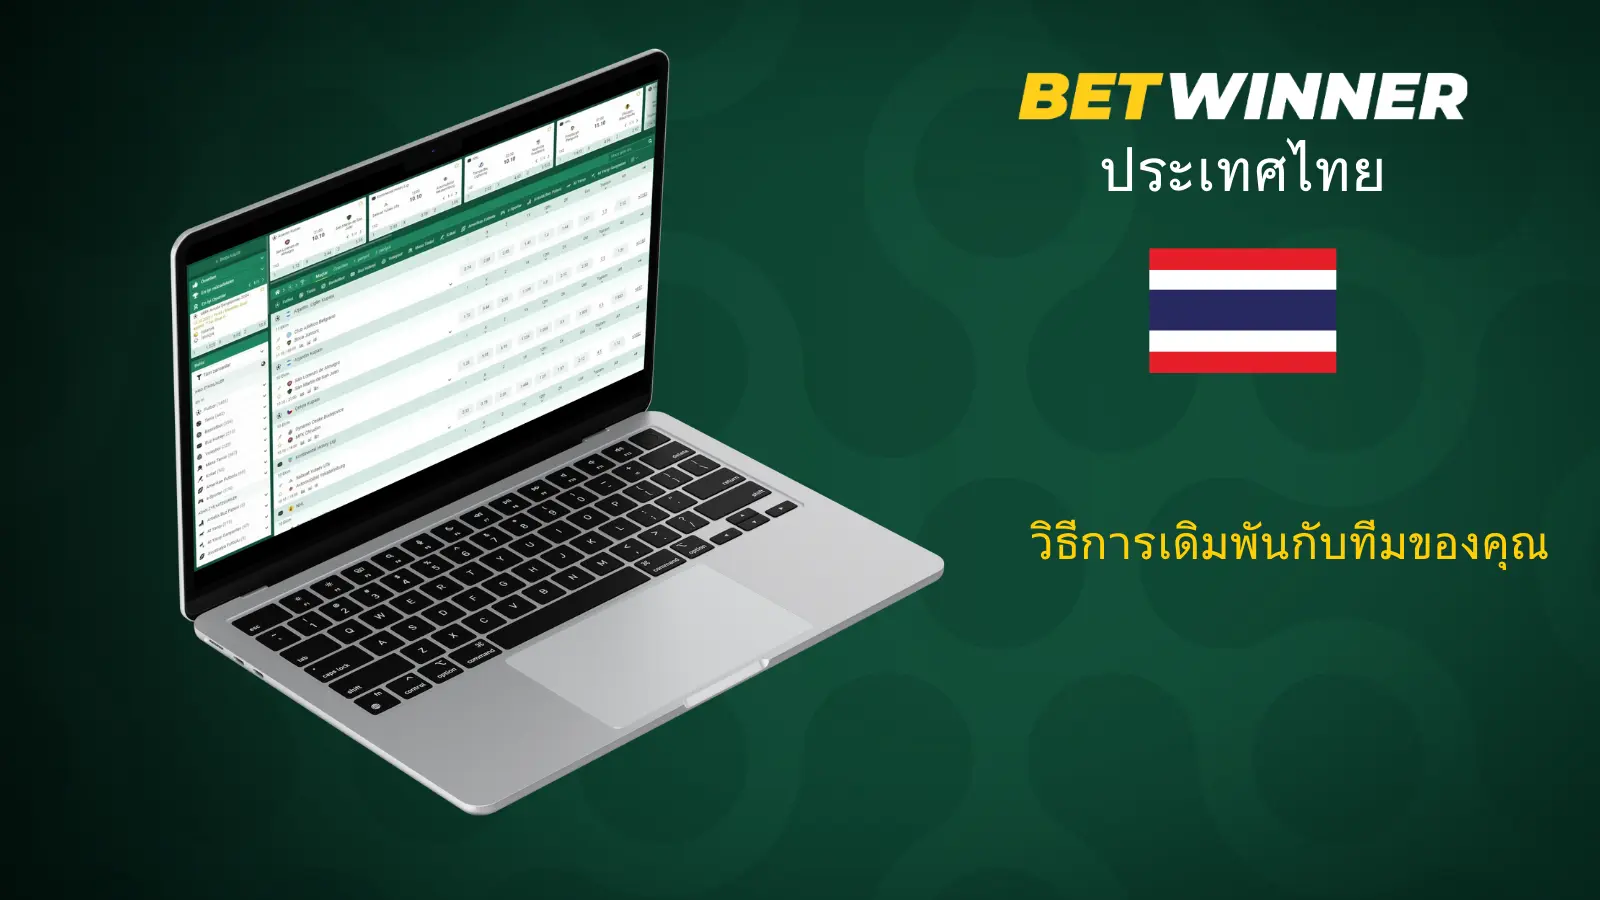 No More Mistakes With betwinner